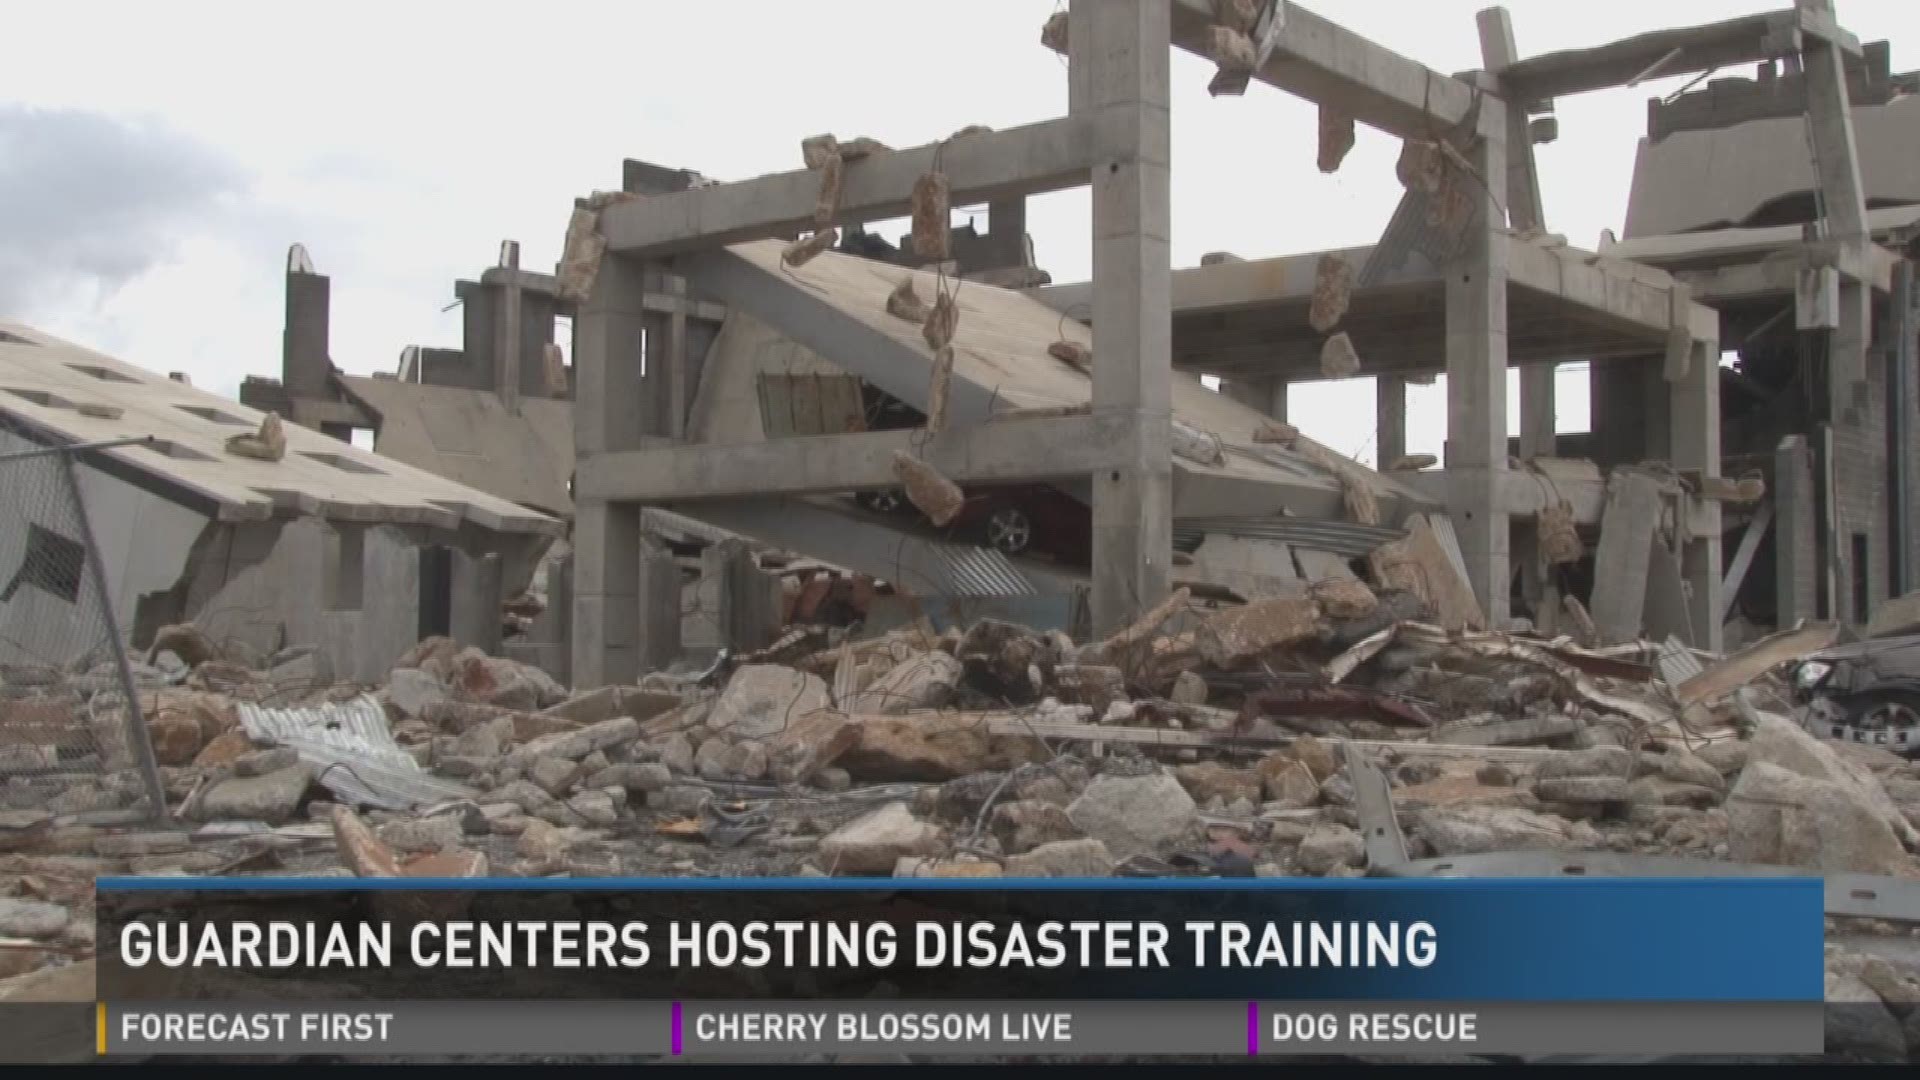 Guardian Centers hosting disaster training